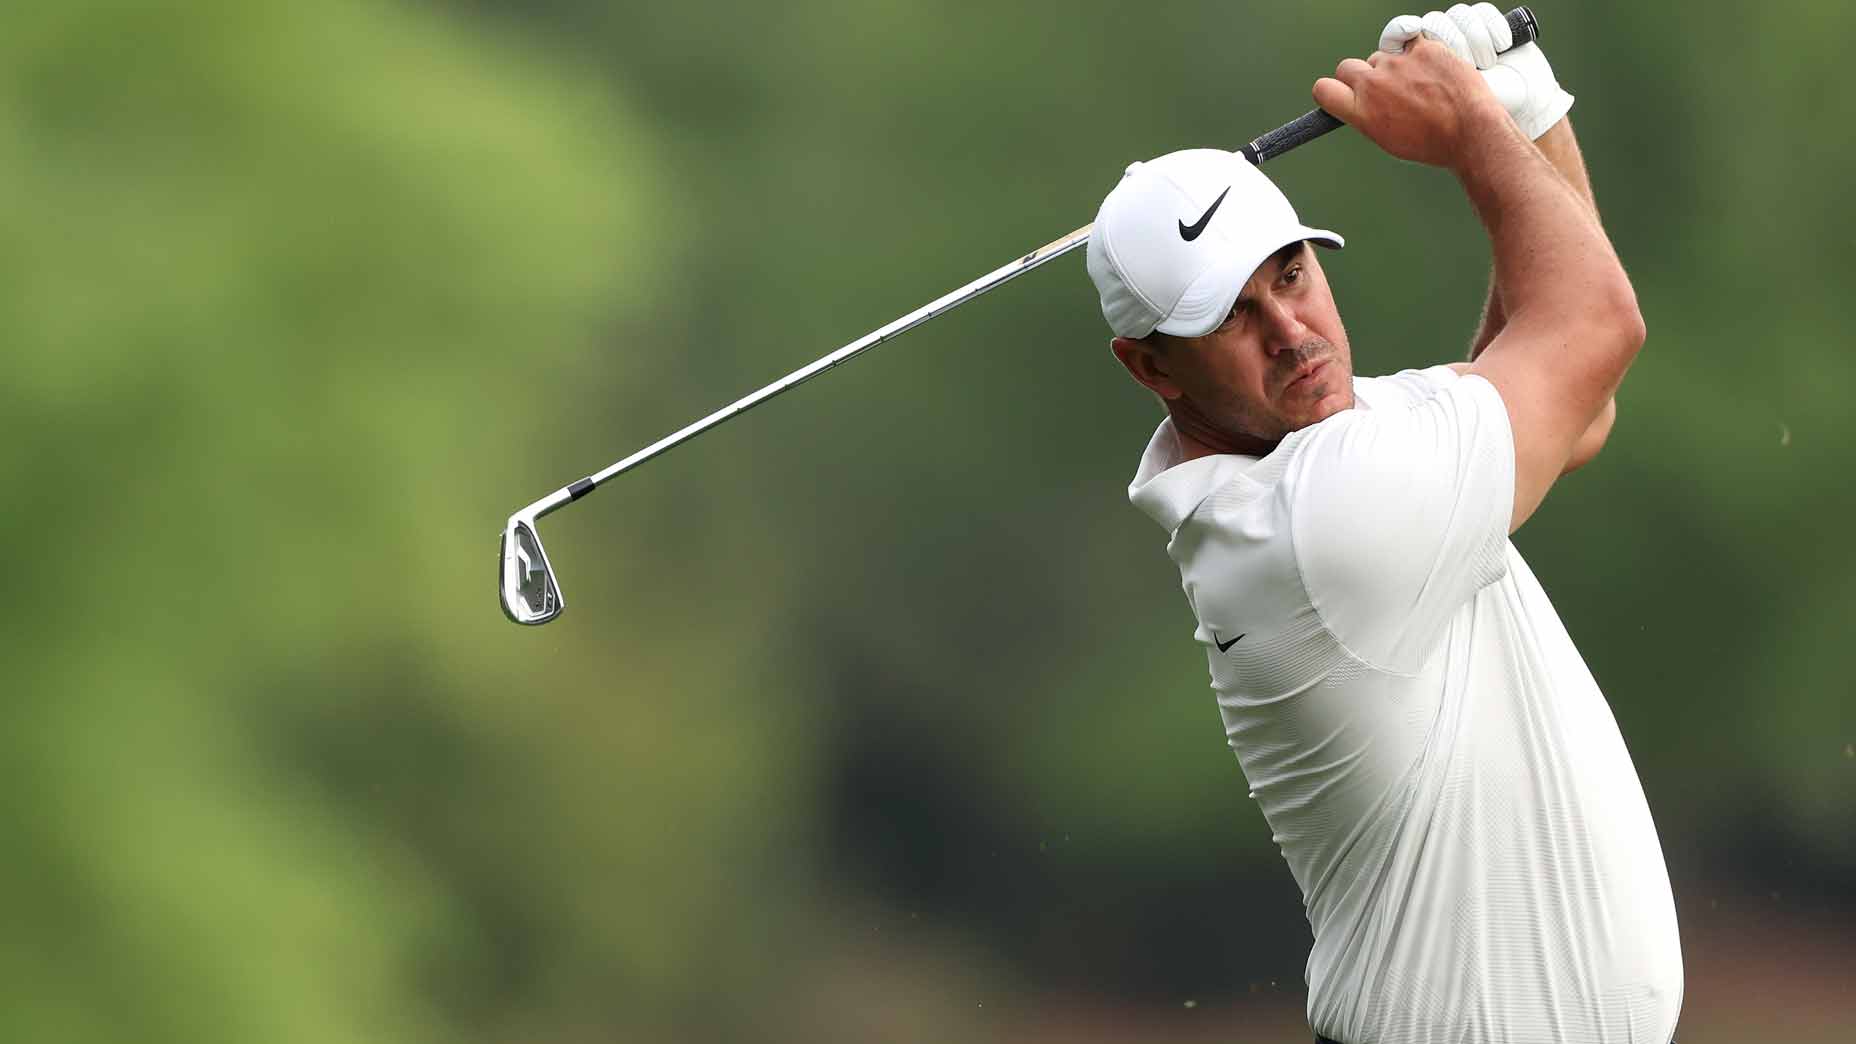 Following his first round at the Masters, Brooks Koepka described how frightening his knee injury was, and how intense the recovery has been